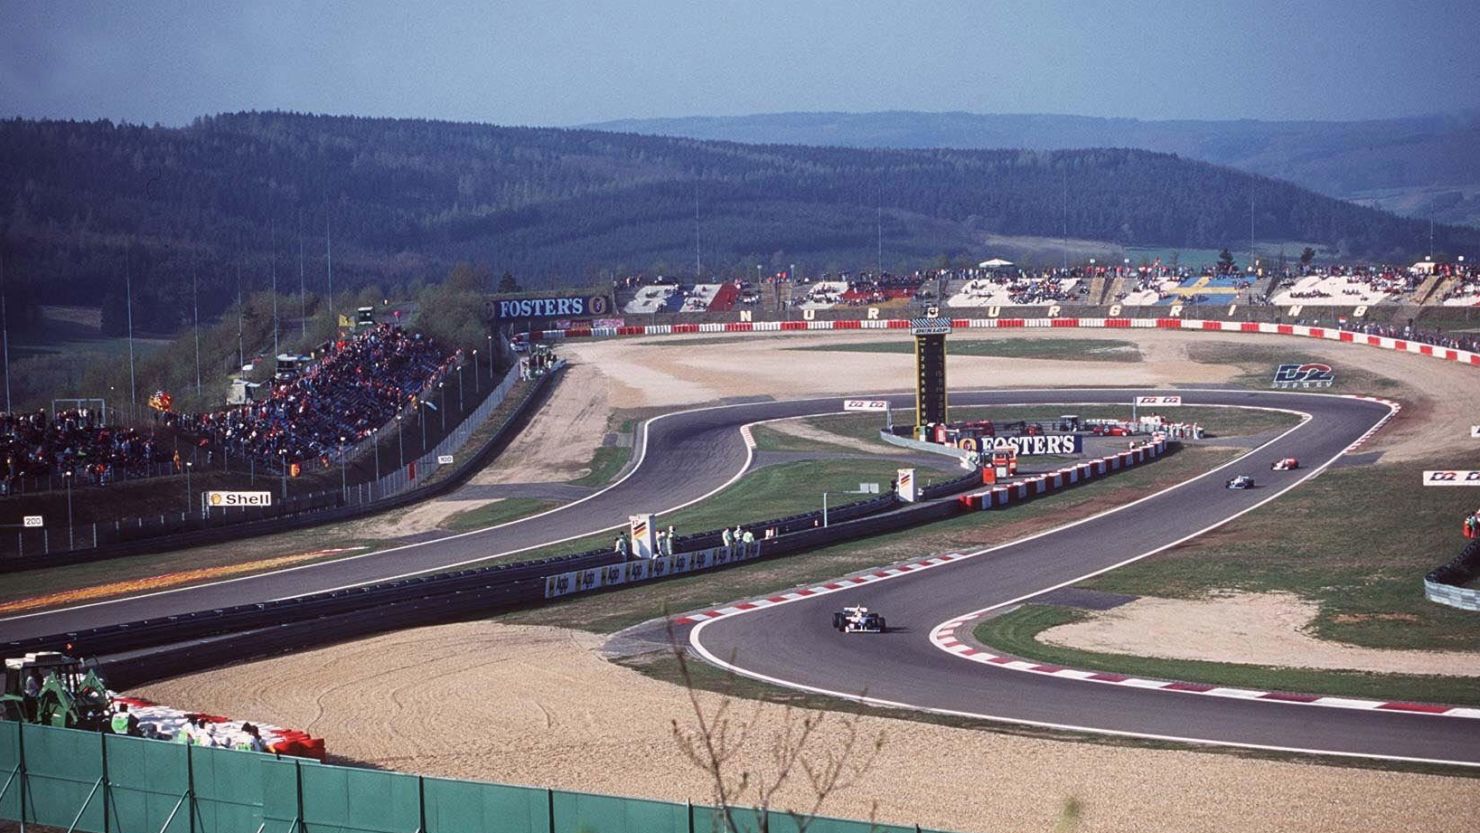 Nurburgring is renowned for its daunting technical challenges and has the nickname of the "Green Hell".